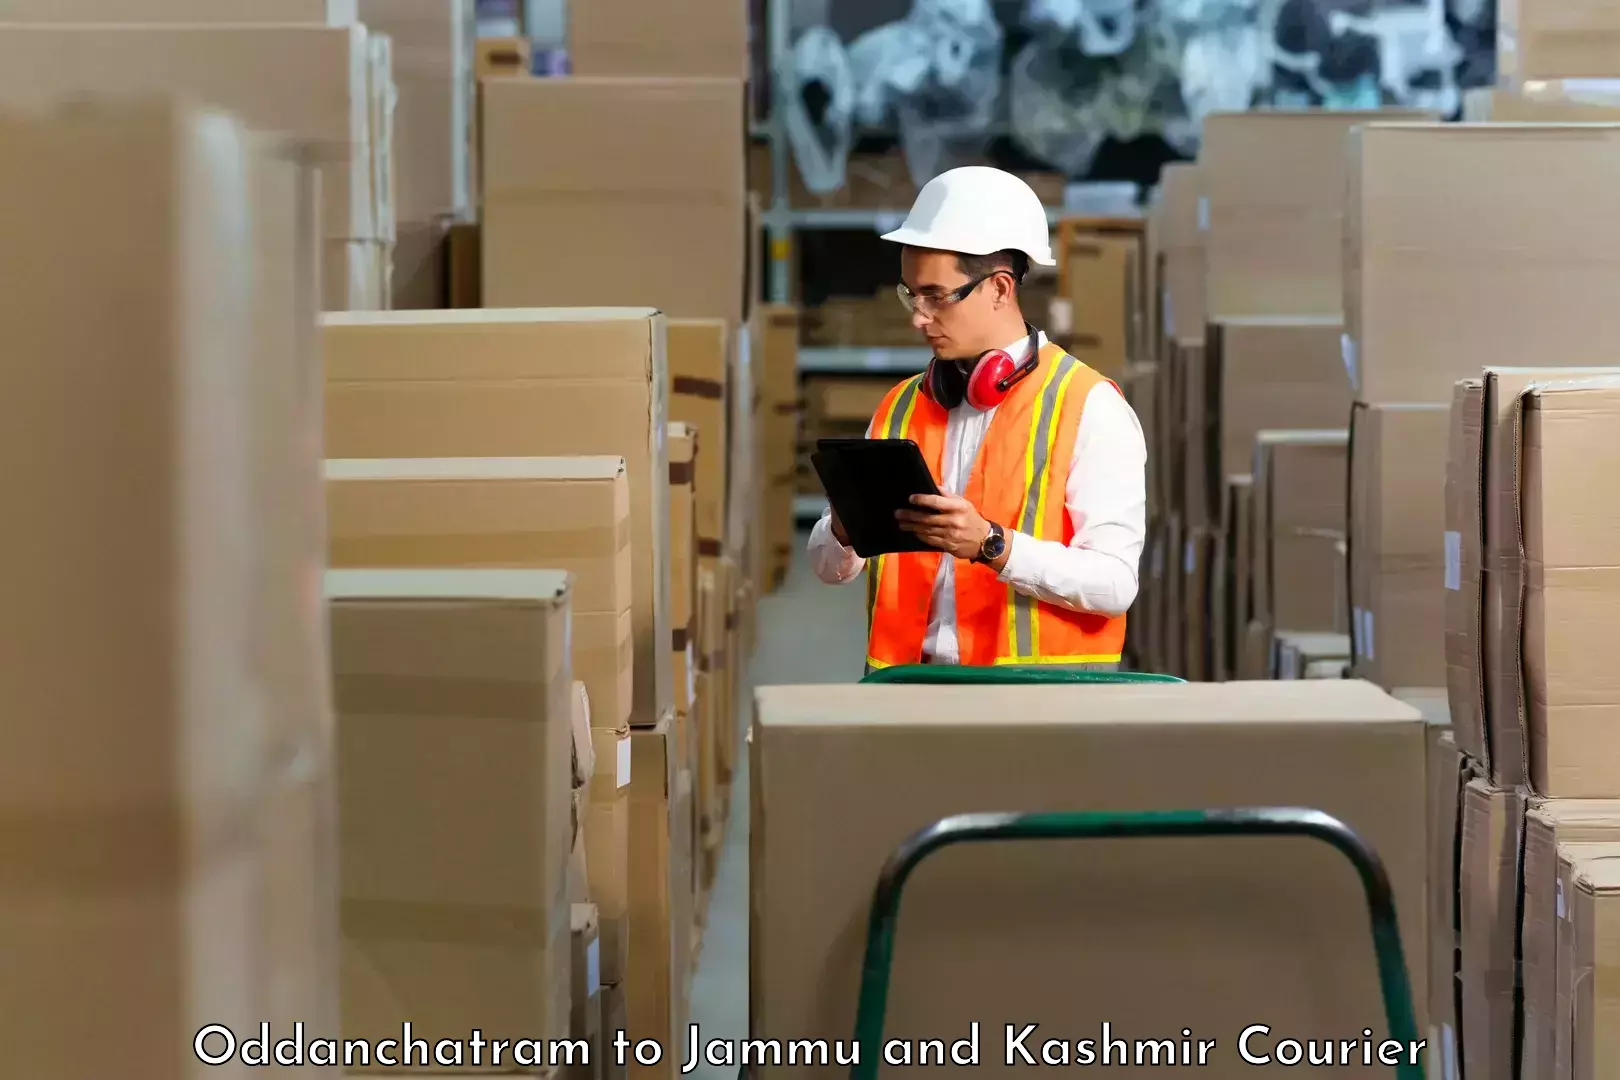 Nationwide courier service Oddanchatram to Jammu and Kashmir